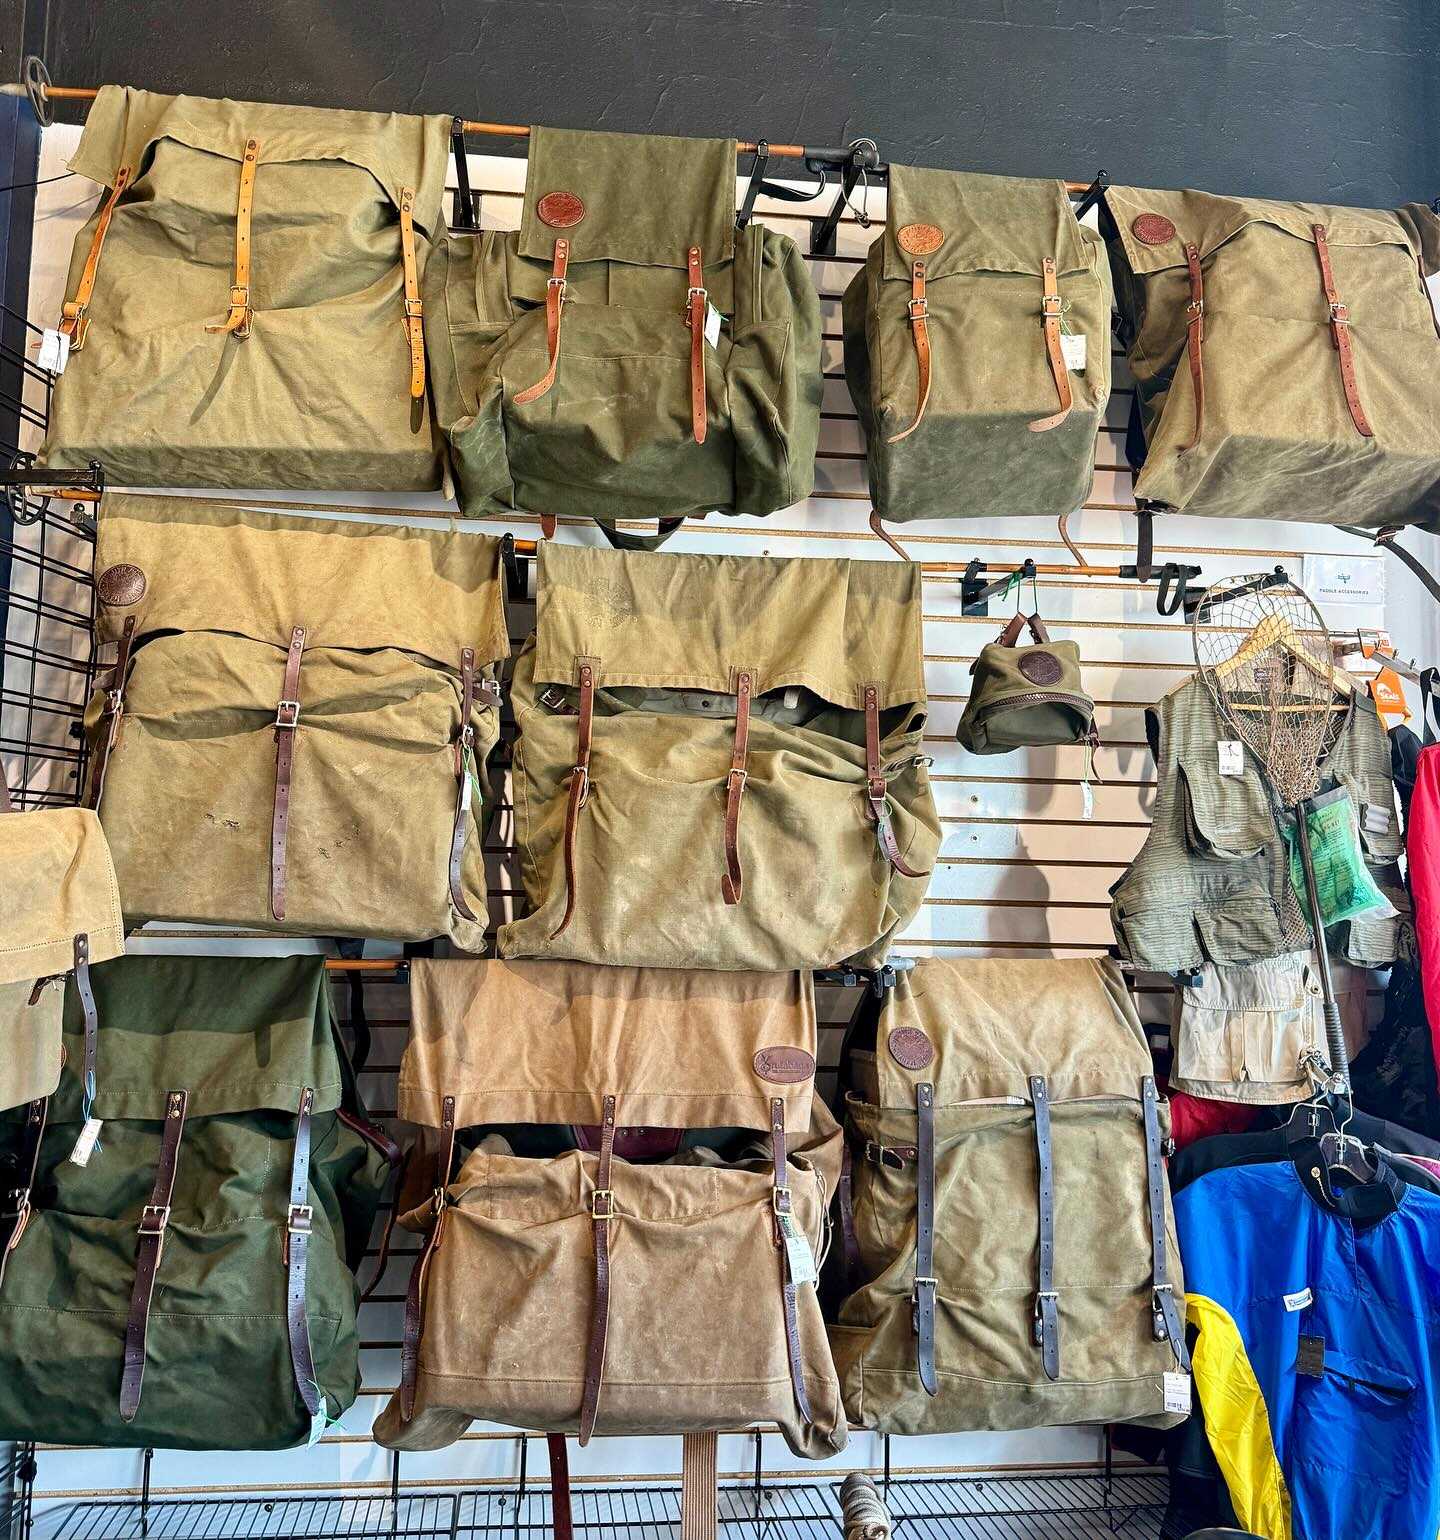 We have LOTS of Portage Packs! @duluthpack @frostriver1910 @portage.north. Come on down and get ready for your BWCAW trip! 🛶🛶🛶🛶🛶🛶🛶
-
#portagepack #portage #canoecamping #canoetrip #bwcaw #wildernesscanoeing